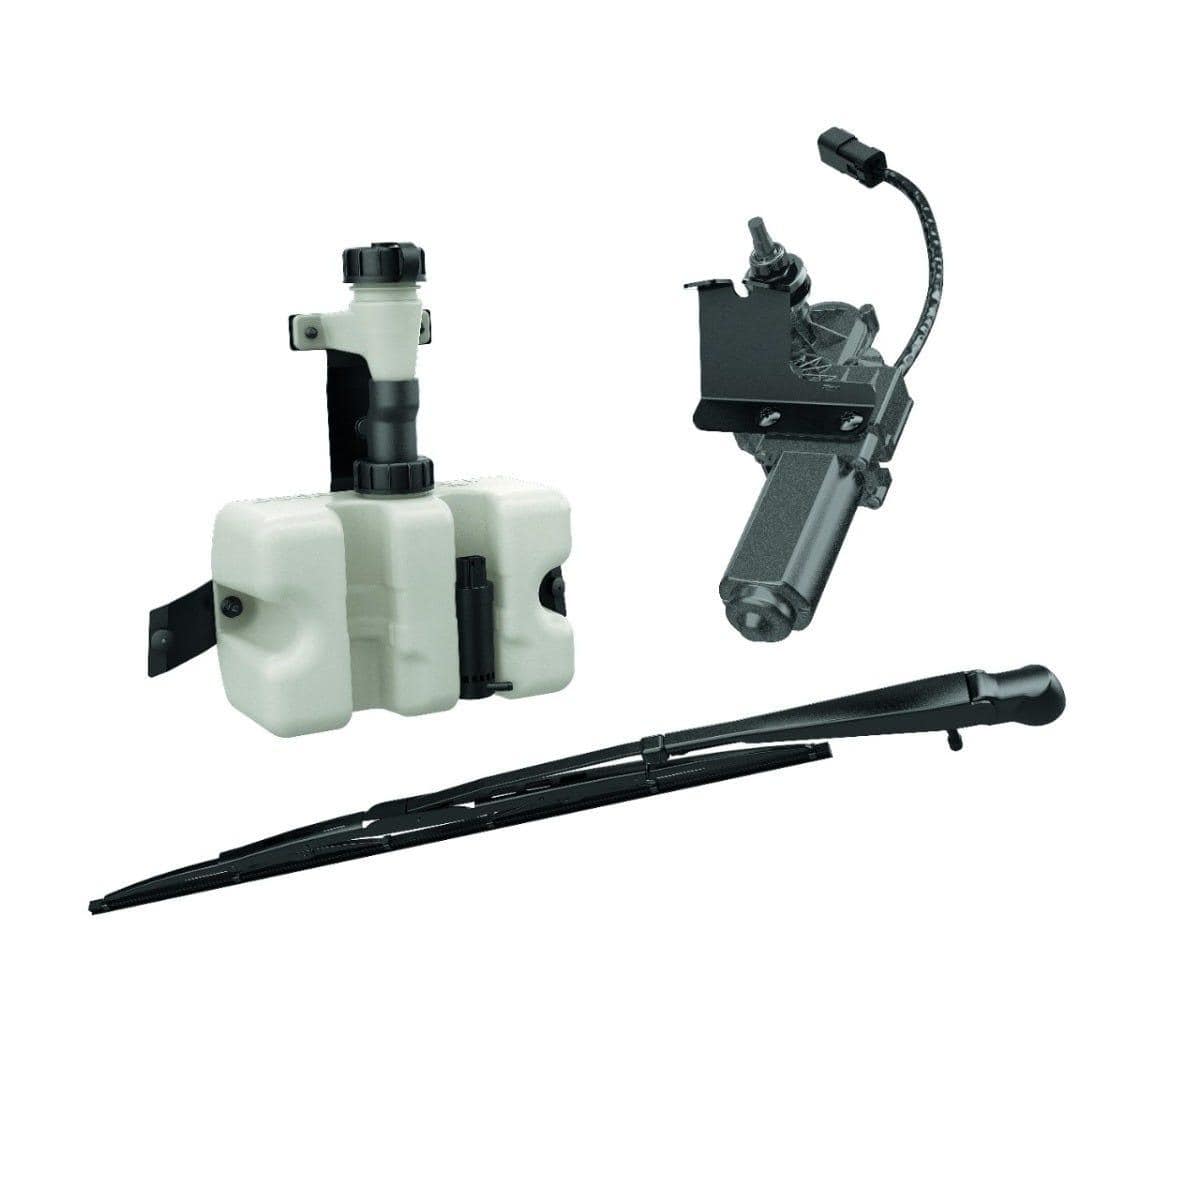 Windshield Wiper and Washer Kit - Factory Recreation